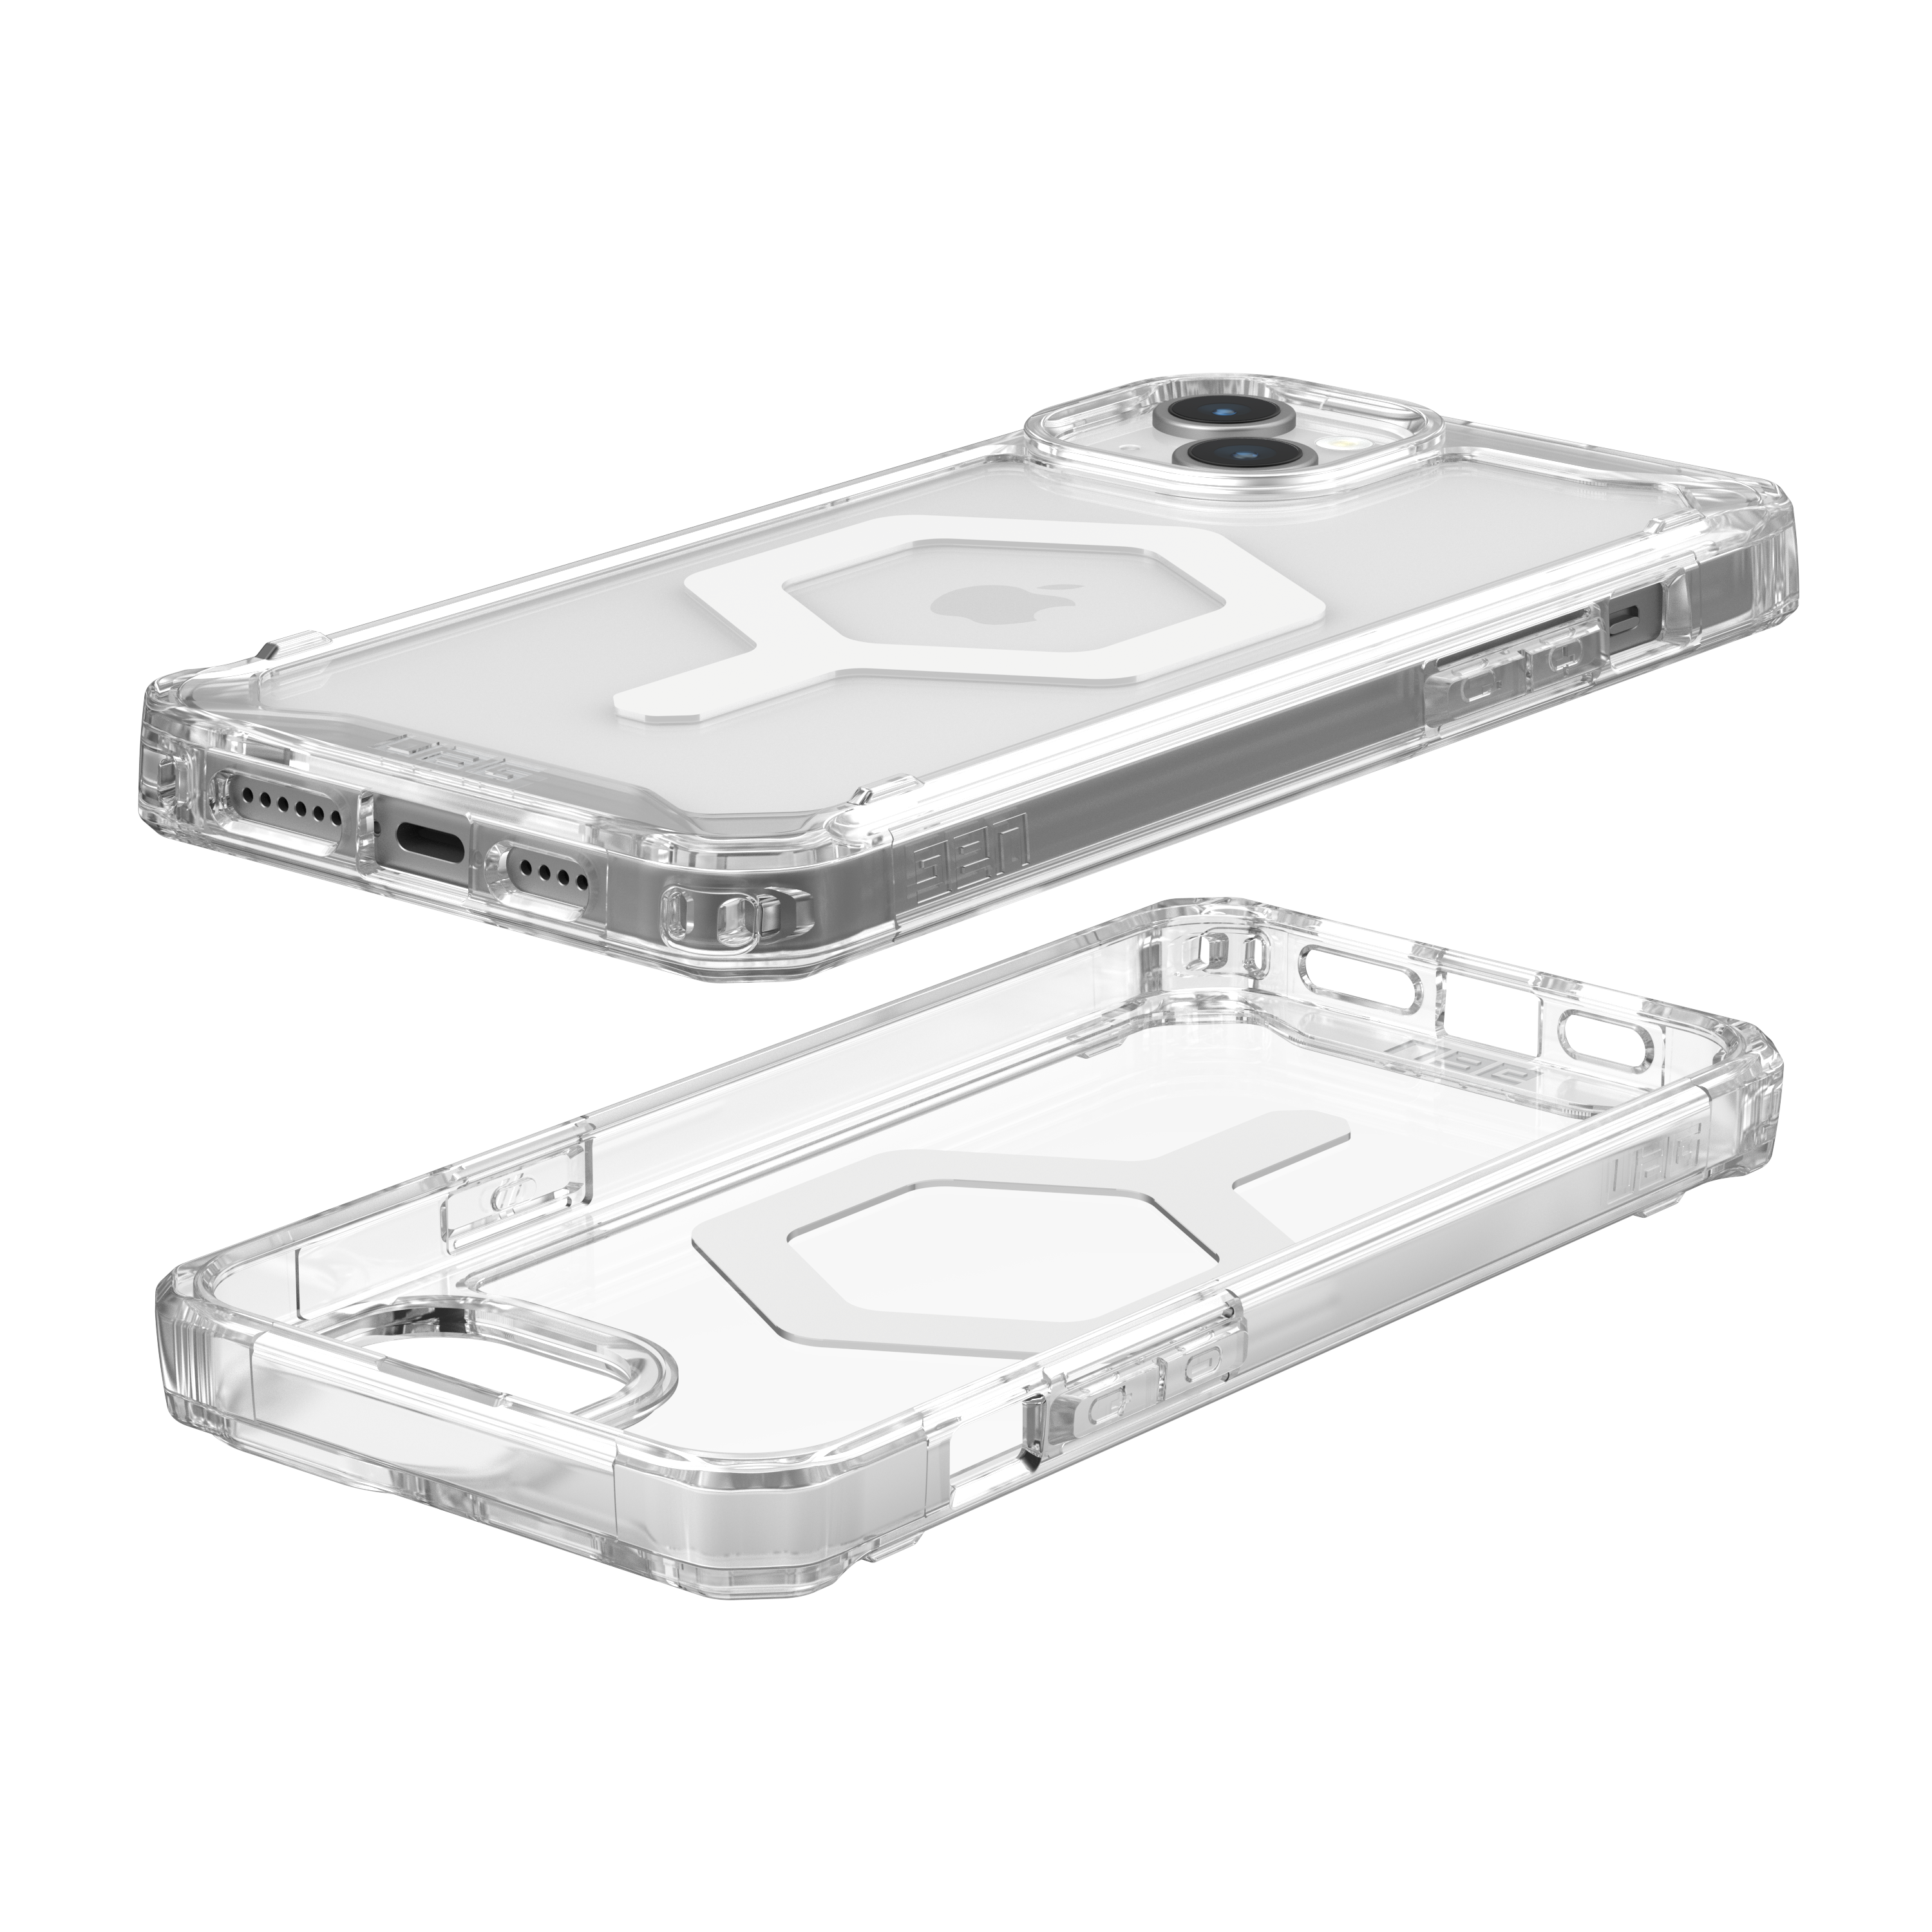 URBAN ARMOR GEAR 15 MagSafe, Apple, (transparent)/weiß Plus, Plyo Backcover, ice iPhone